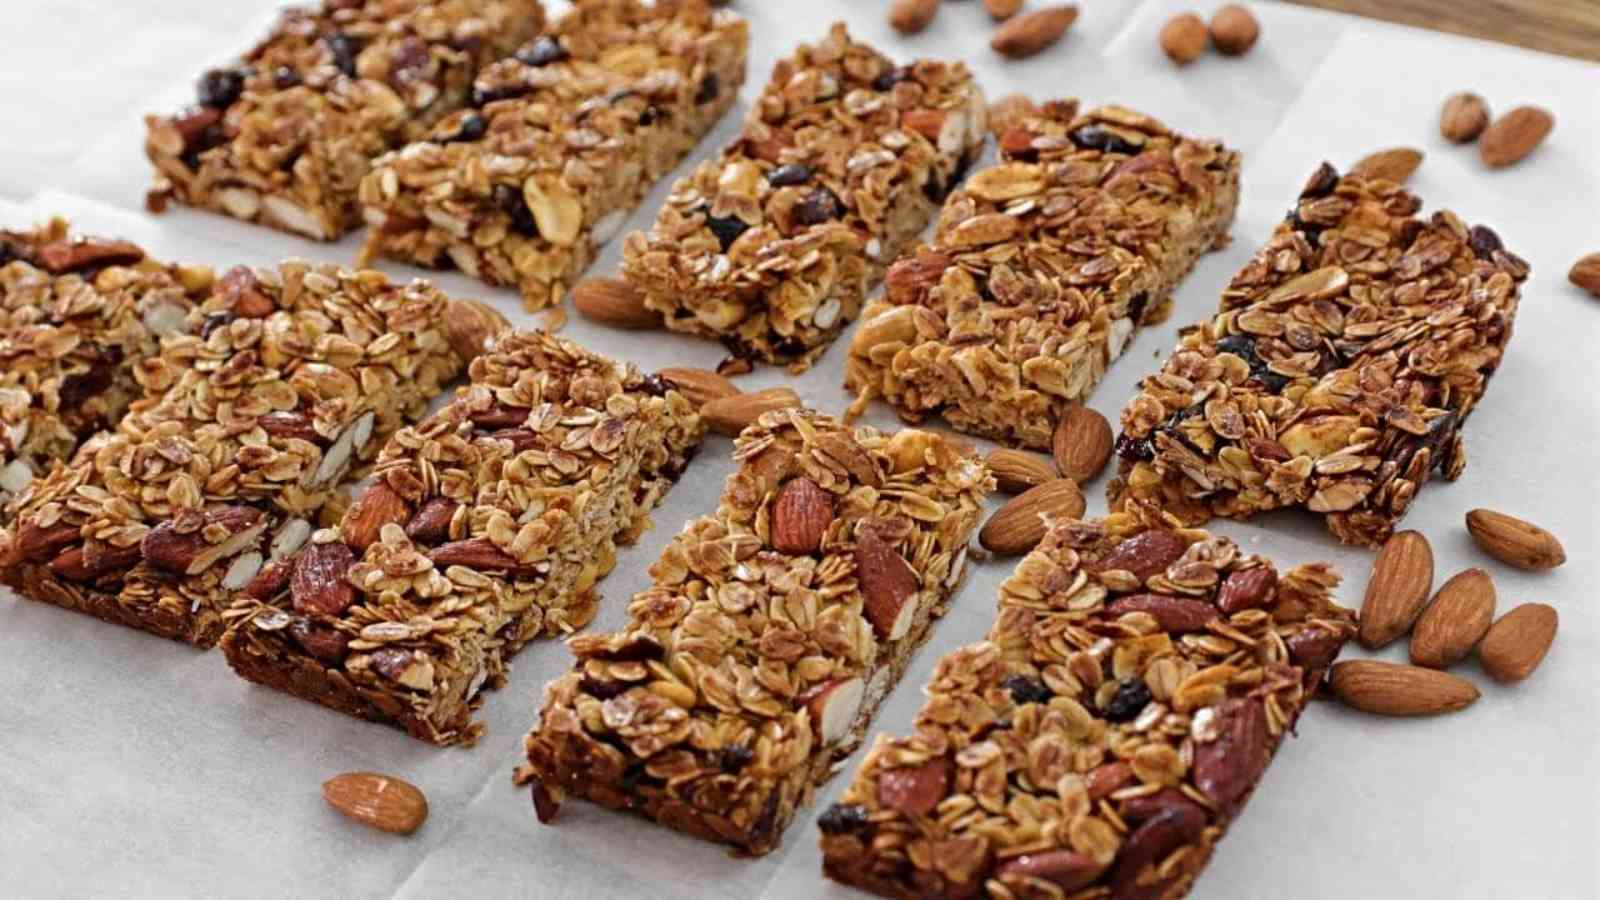 National Granola Bar Day 2023: Date, History, Top 5 recipes